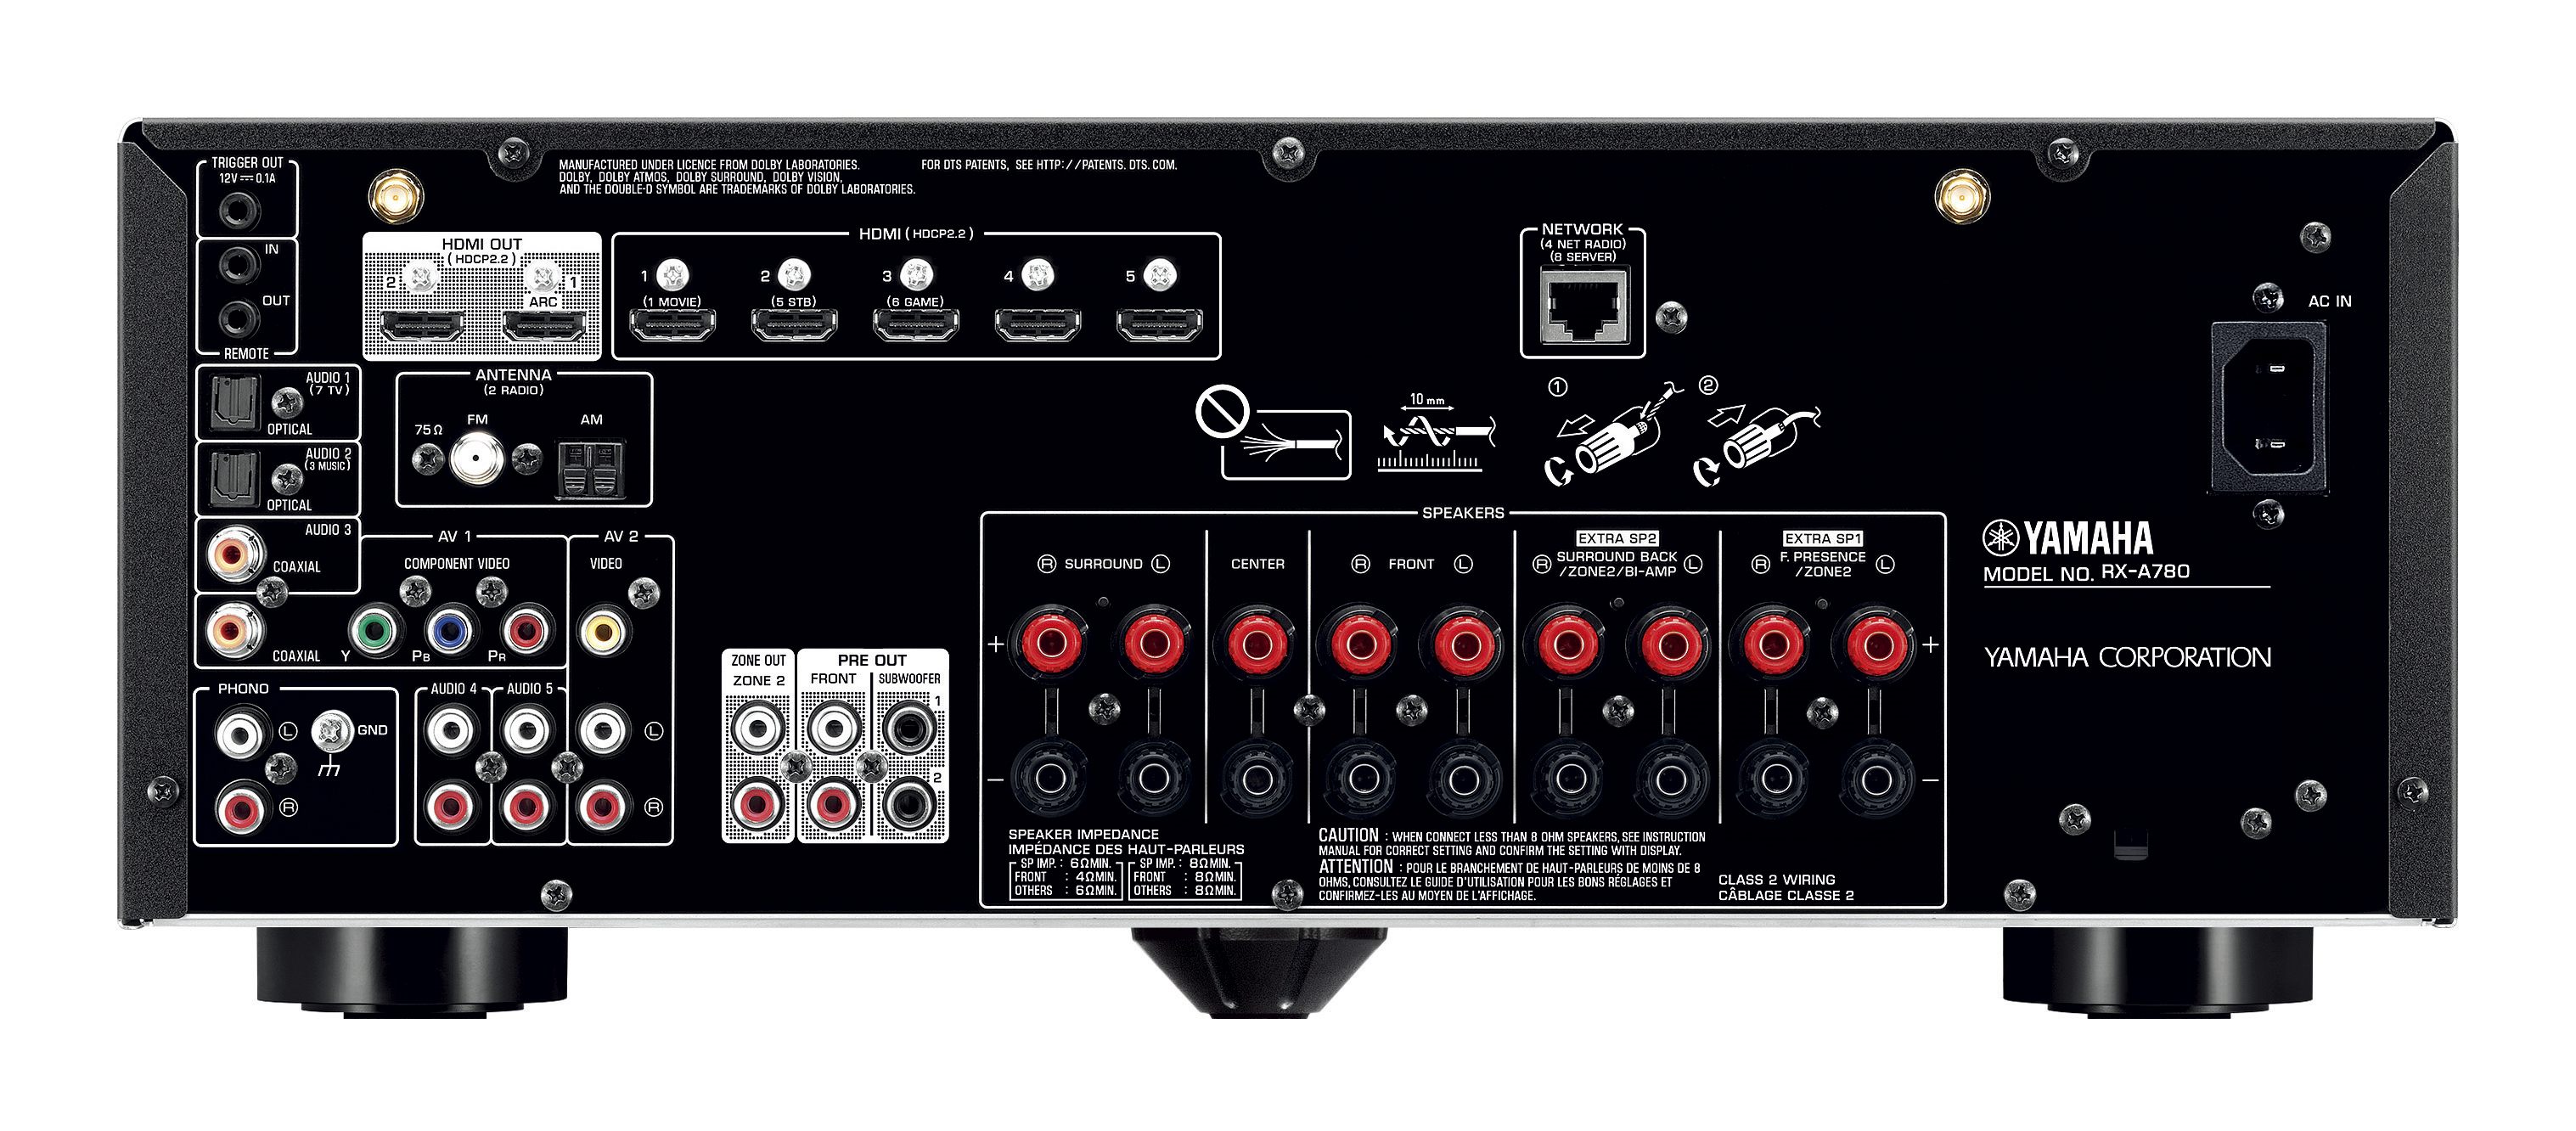 RX-A780 - Overview - AV Receivers - Audio & Visual - Products - Yamaha USA